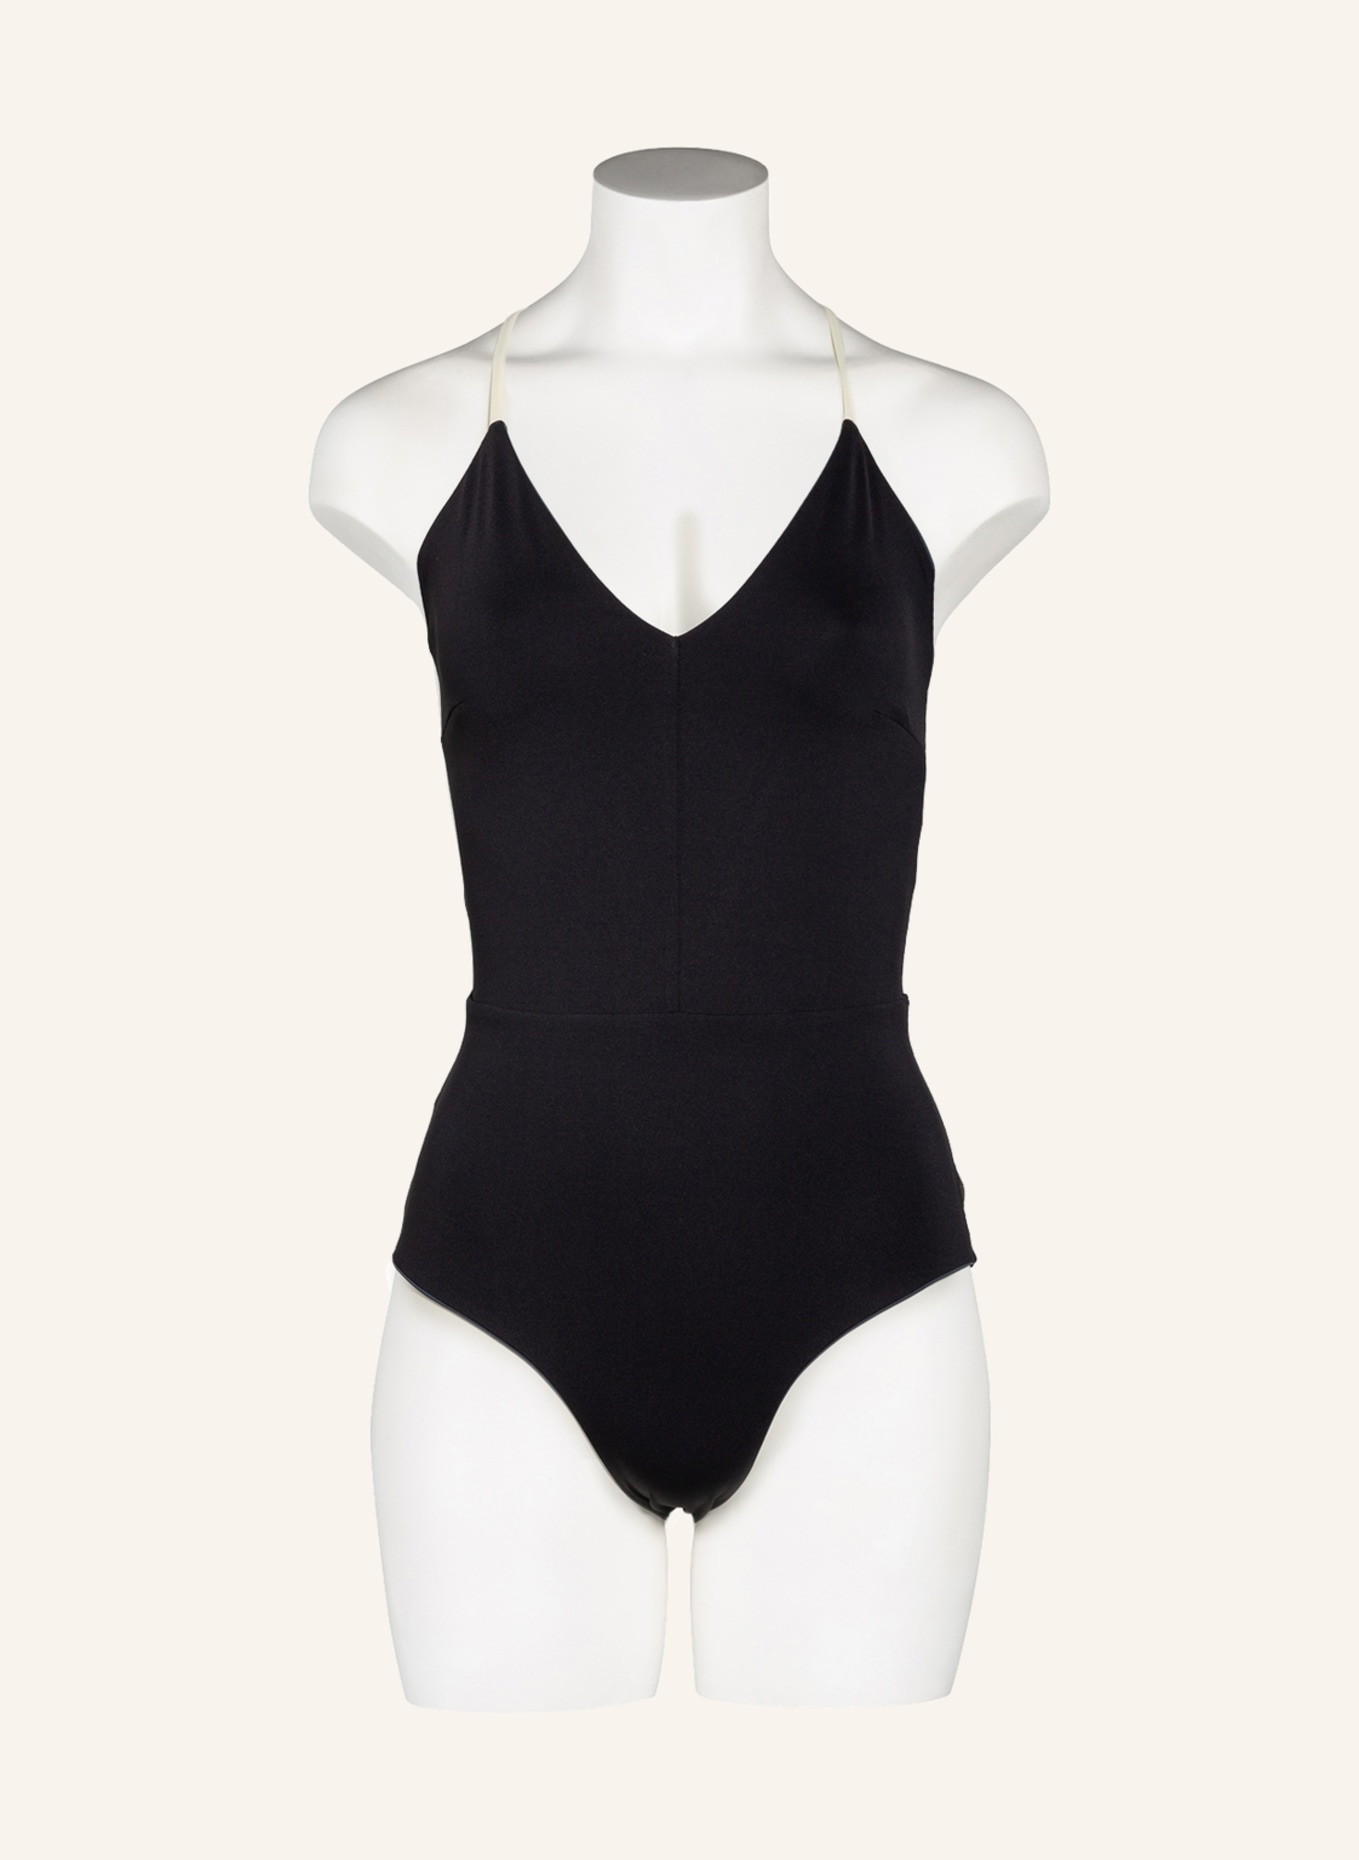 MYMARINI Swimsuit SUMMERSUIT reversible with UV protection 50+, Color: BLACK/ GRAY/ ECRU (Image 2)